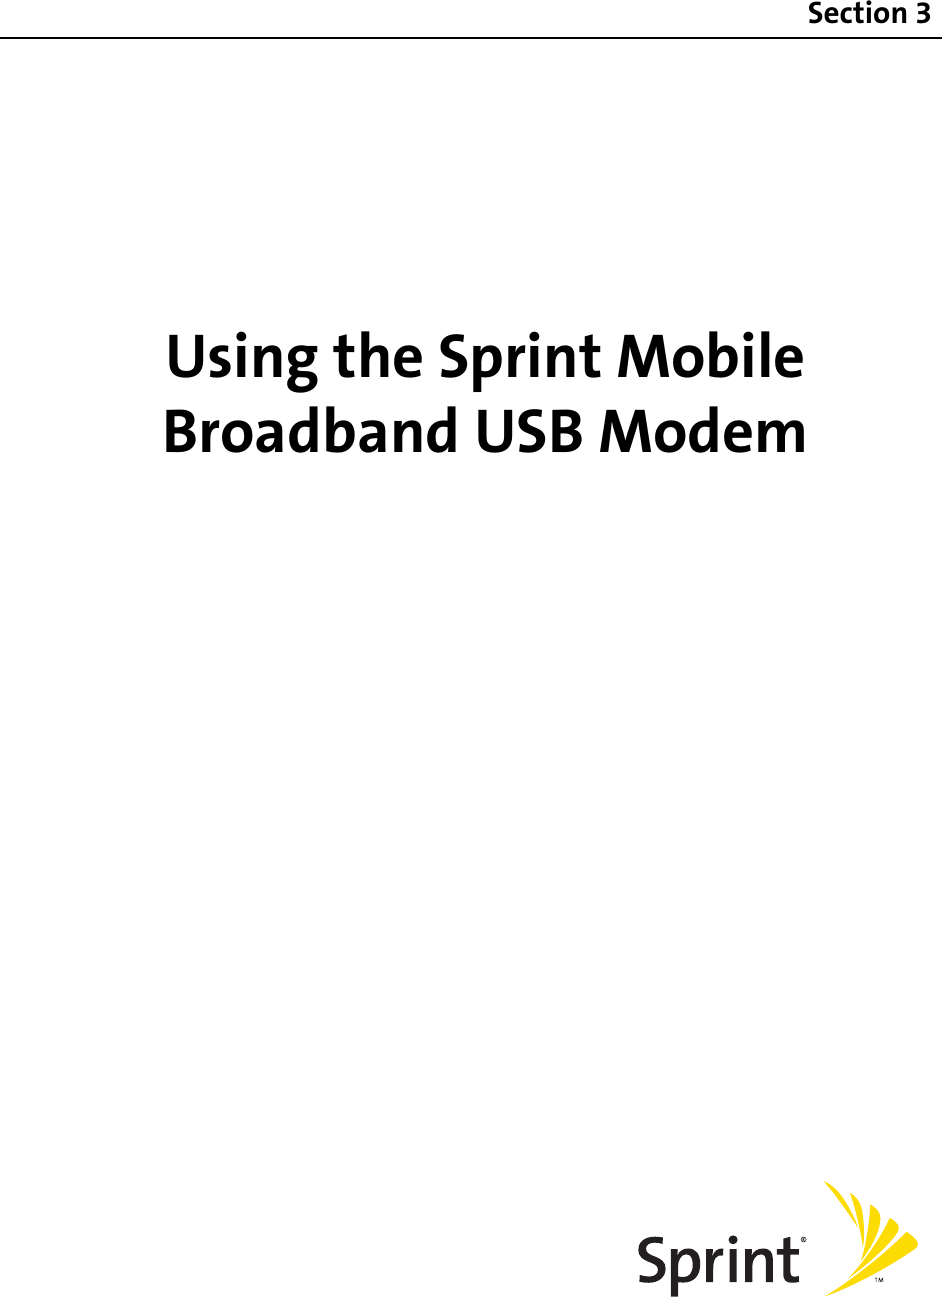 Using the Sprint Mobile Broadband USB ModemSection 3